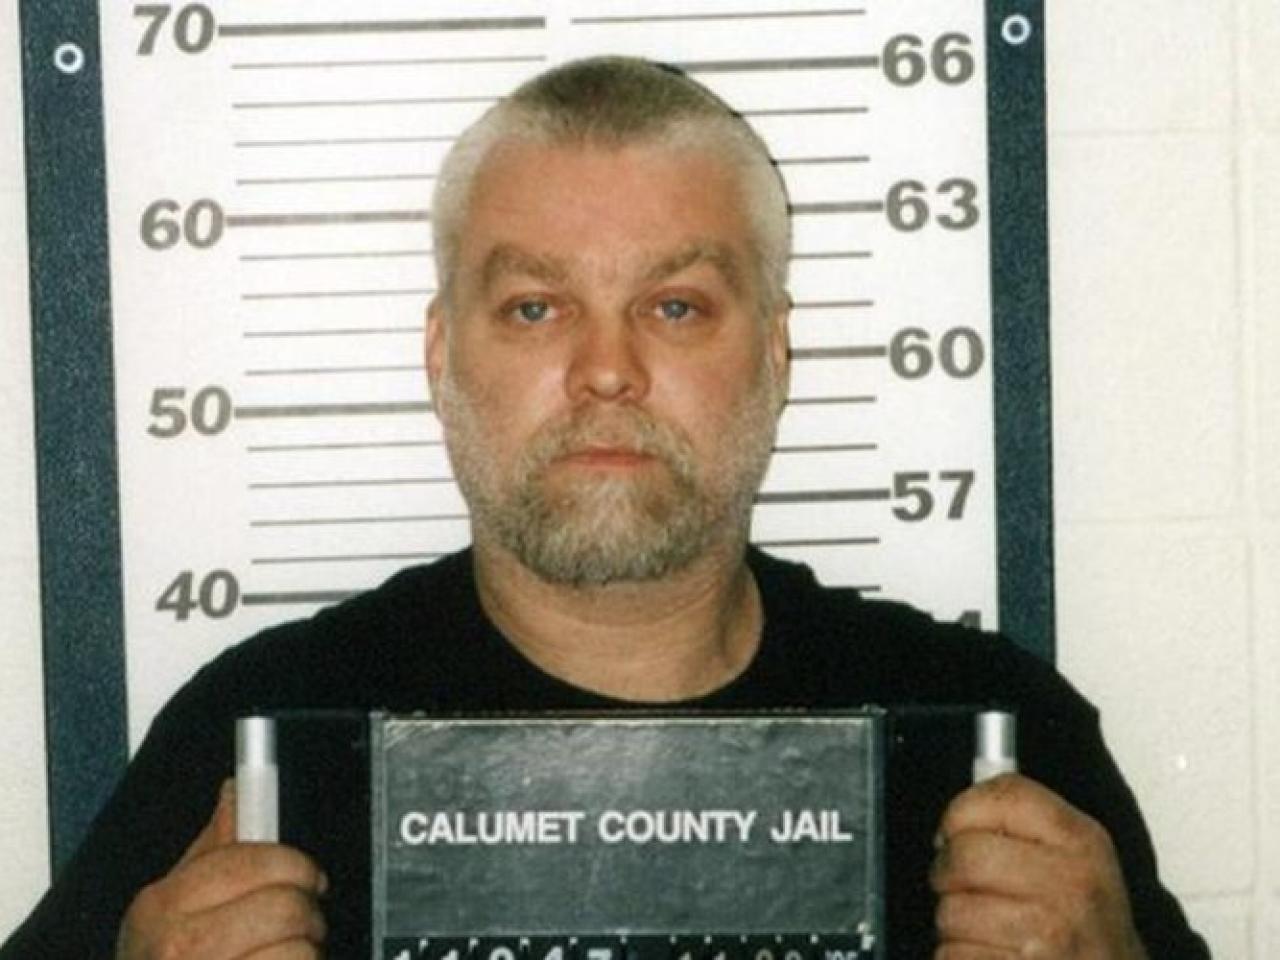 10 Actors Who Could Play Steven Avery In A Making A Murderer Movie